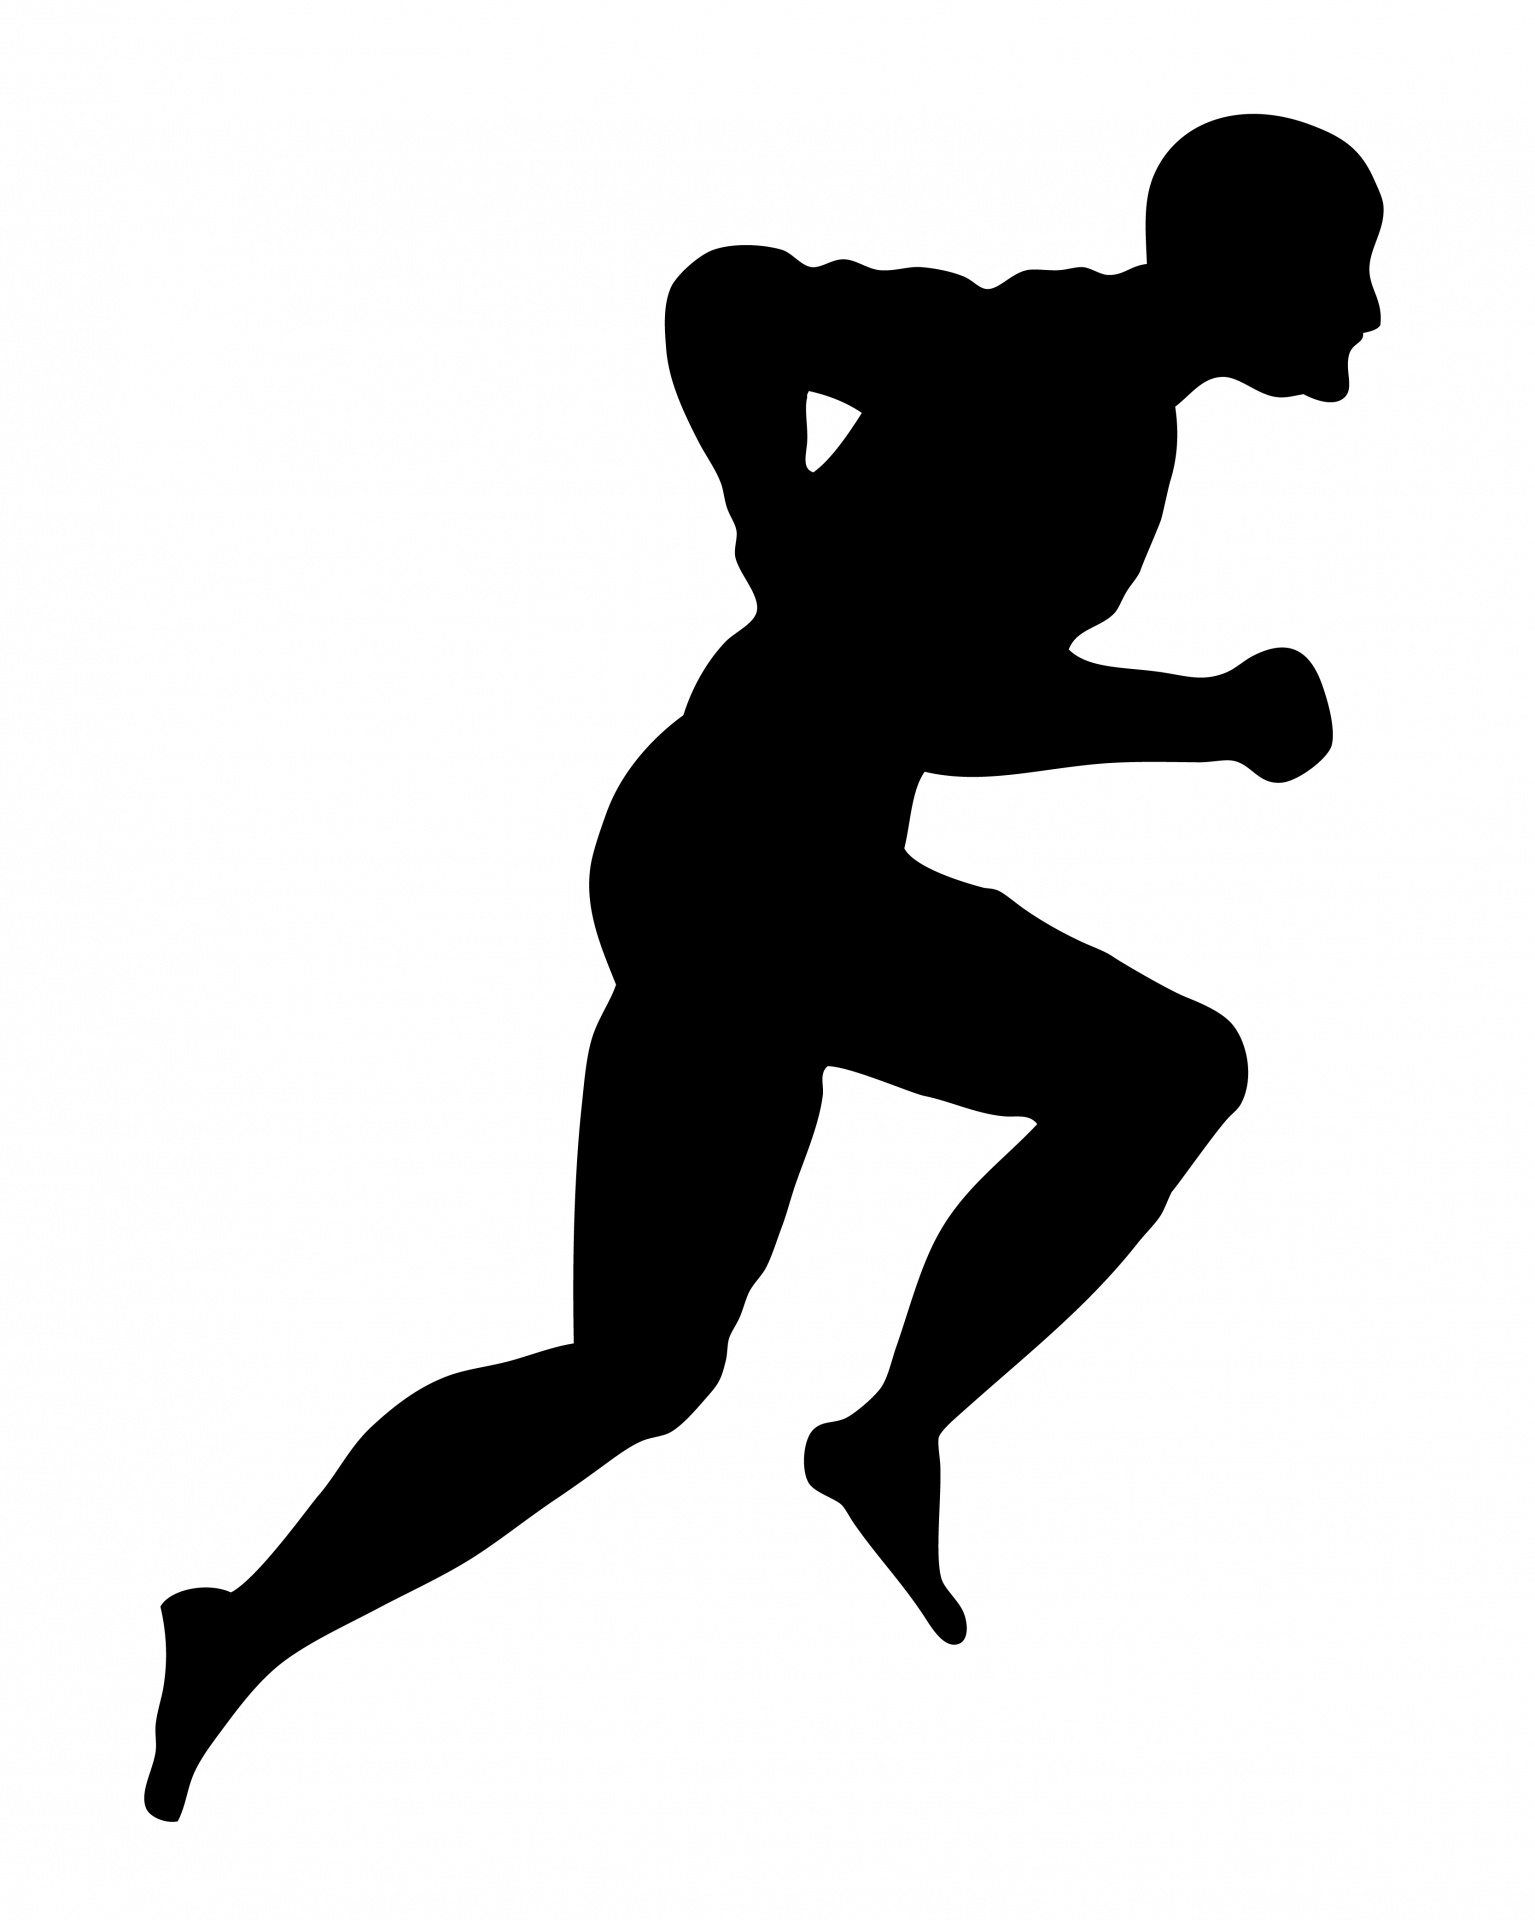 Running silhouette clipart black and white